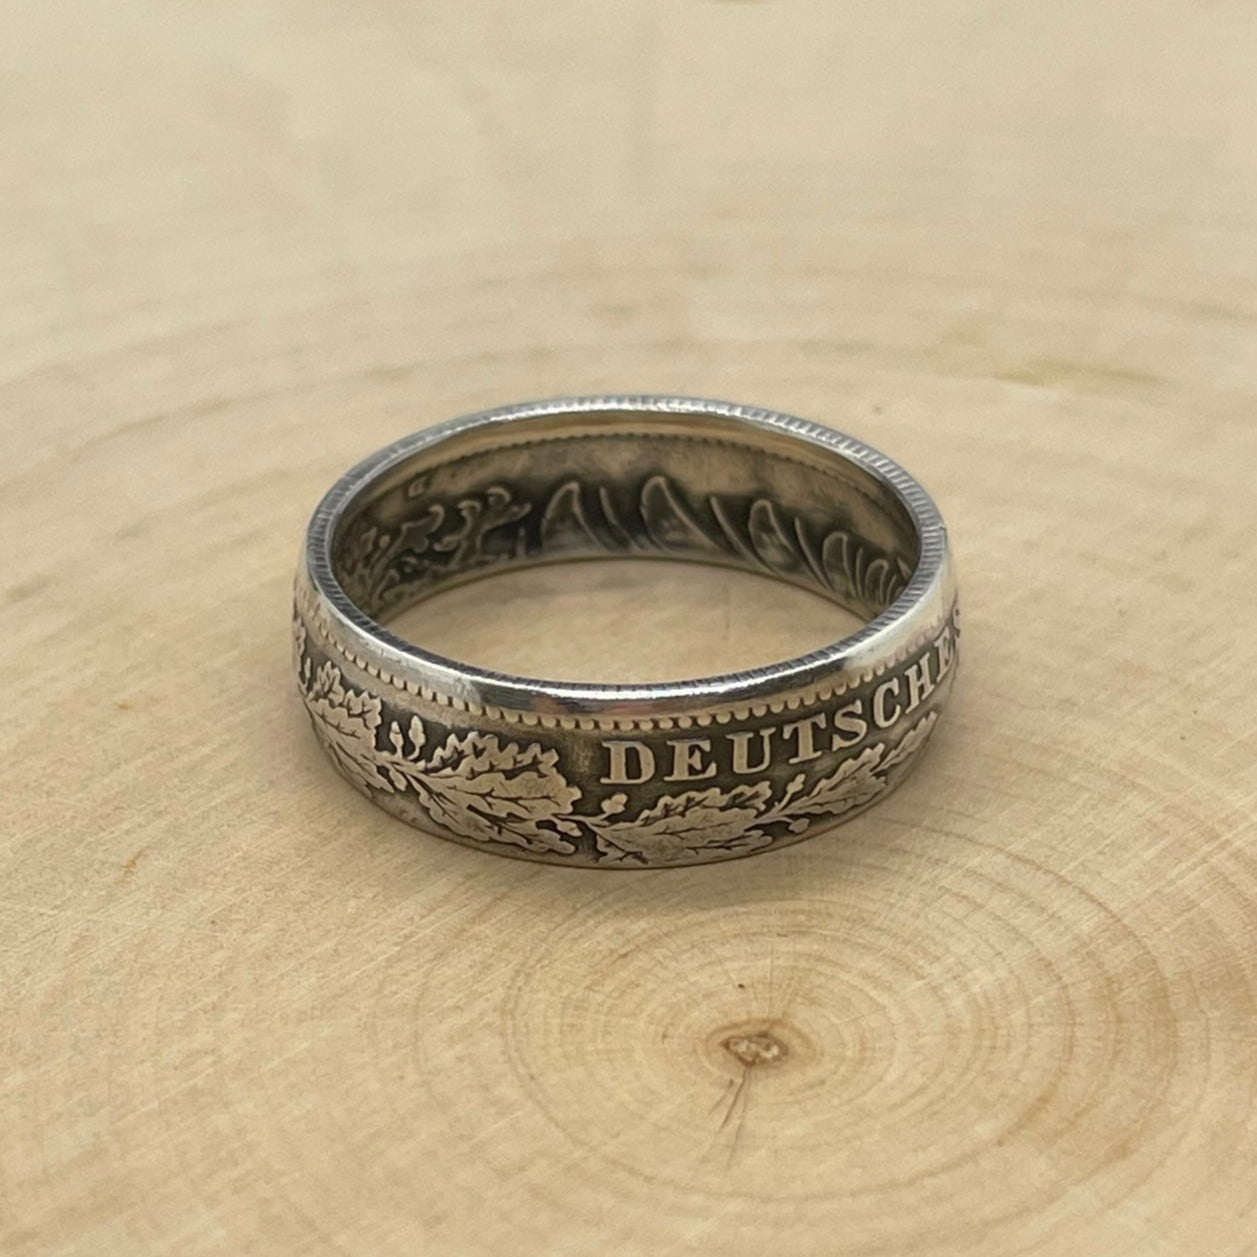 Germany 1 Mark Silver Ring